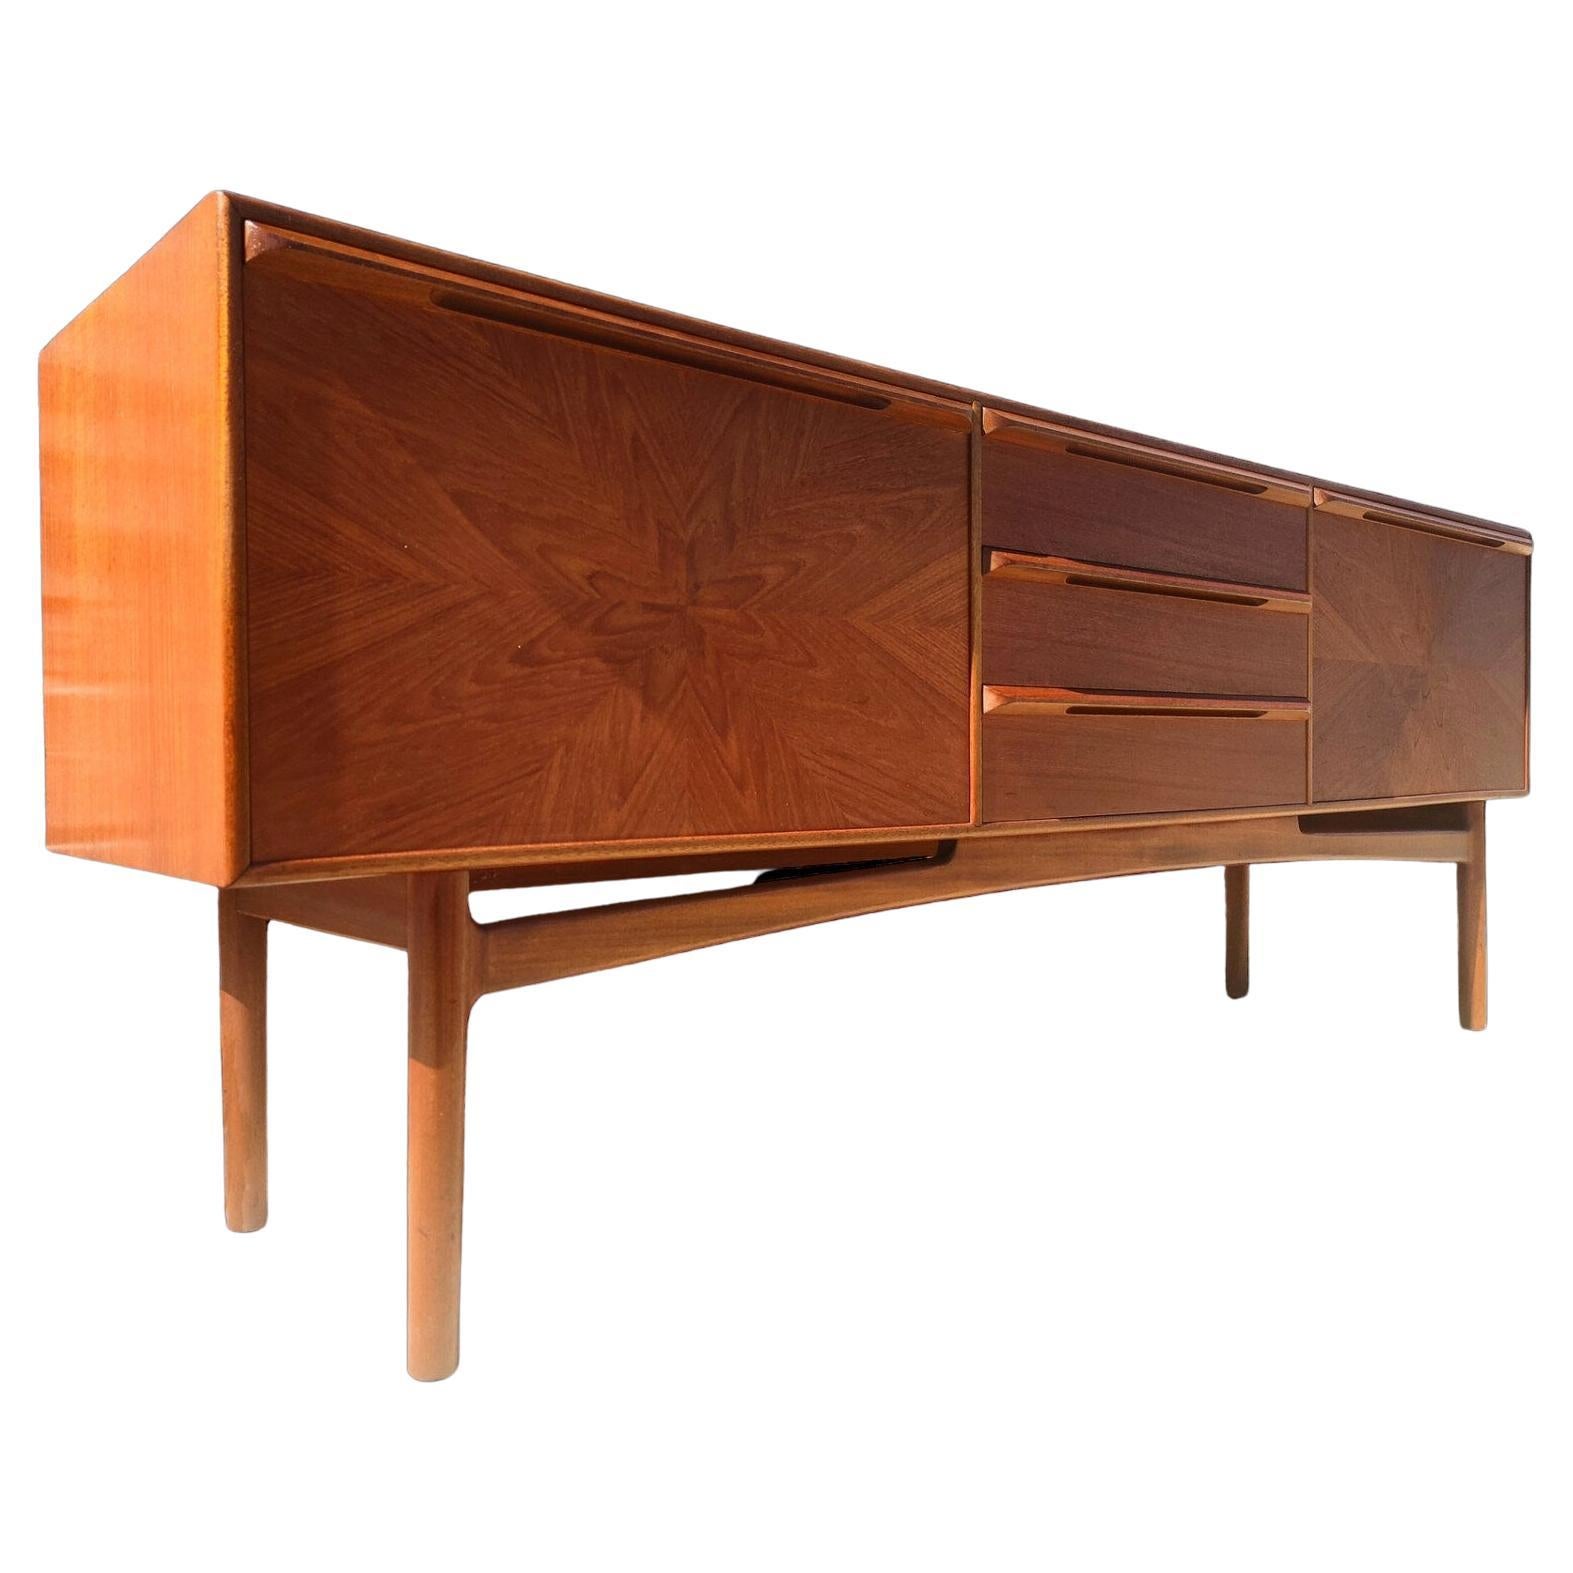 Mid Century English Modern Teak Sideboard by McIntosh
 
Above average vintage condition and structurally sound. Has some expected slight finish wear and scratching. Top has been refinished and does not have original factory finish. Very unique and